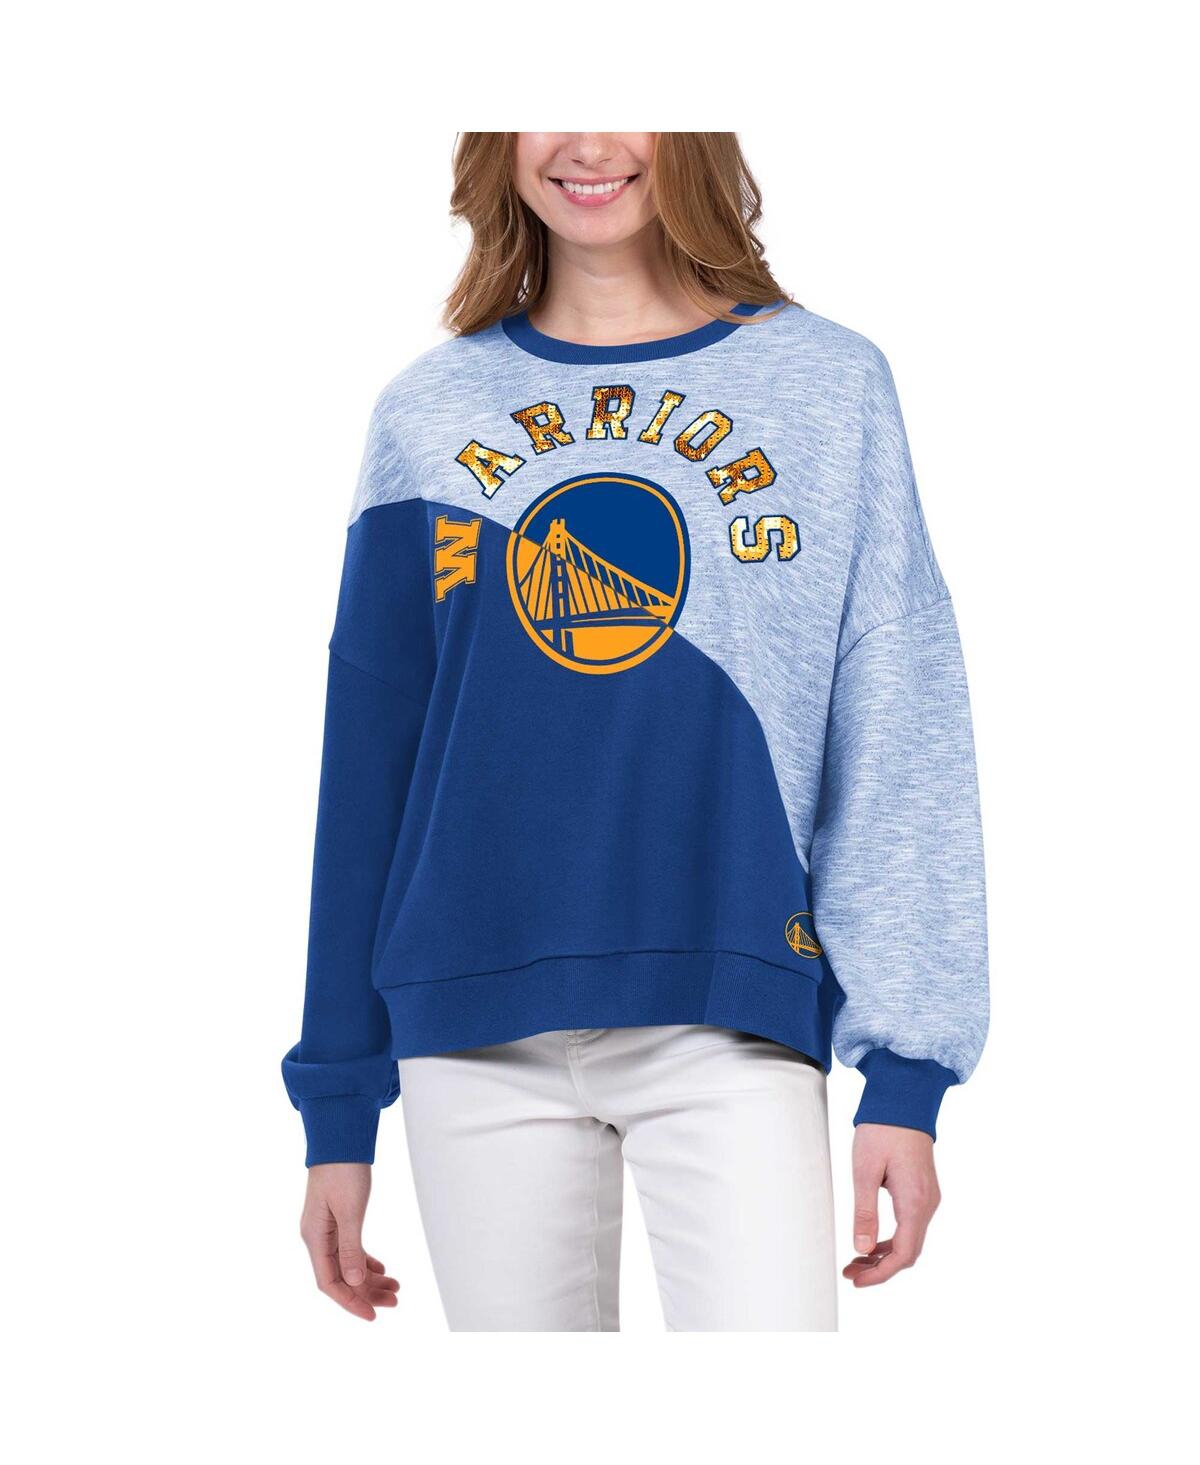 G-III 4HER BY CARL BANKS WOMEN'S G-III 4HER BY CARL BANKS ROYAL GOLDEN STATE WARRIORS BENCHES SPLIT PULLOVER SWEATSHIRT